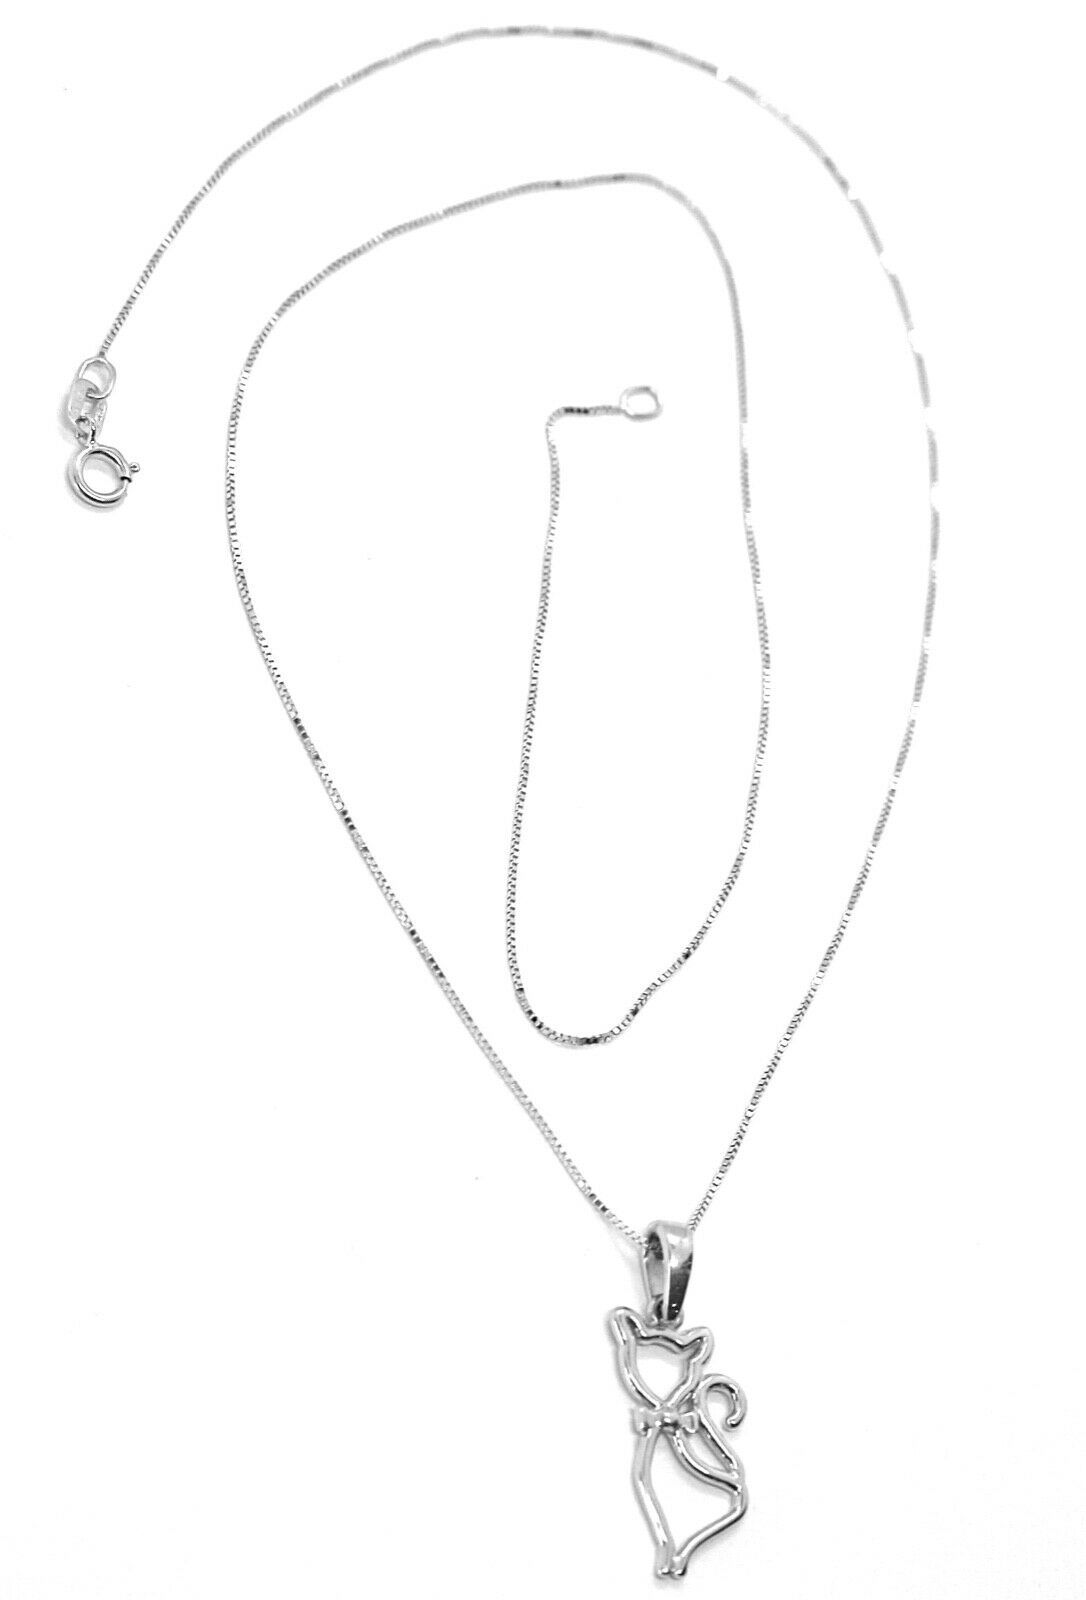 Primary image for 18K WHITE GOLD MINI NECKLACE, CAT PENDANT 0.7" AND VENETIAN CHAIN 17.7"